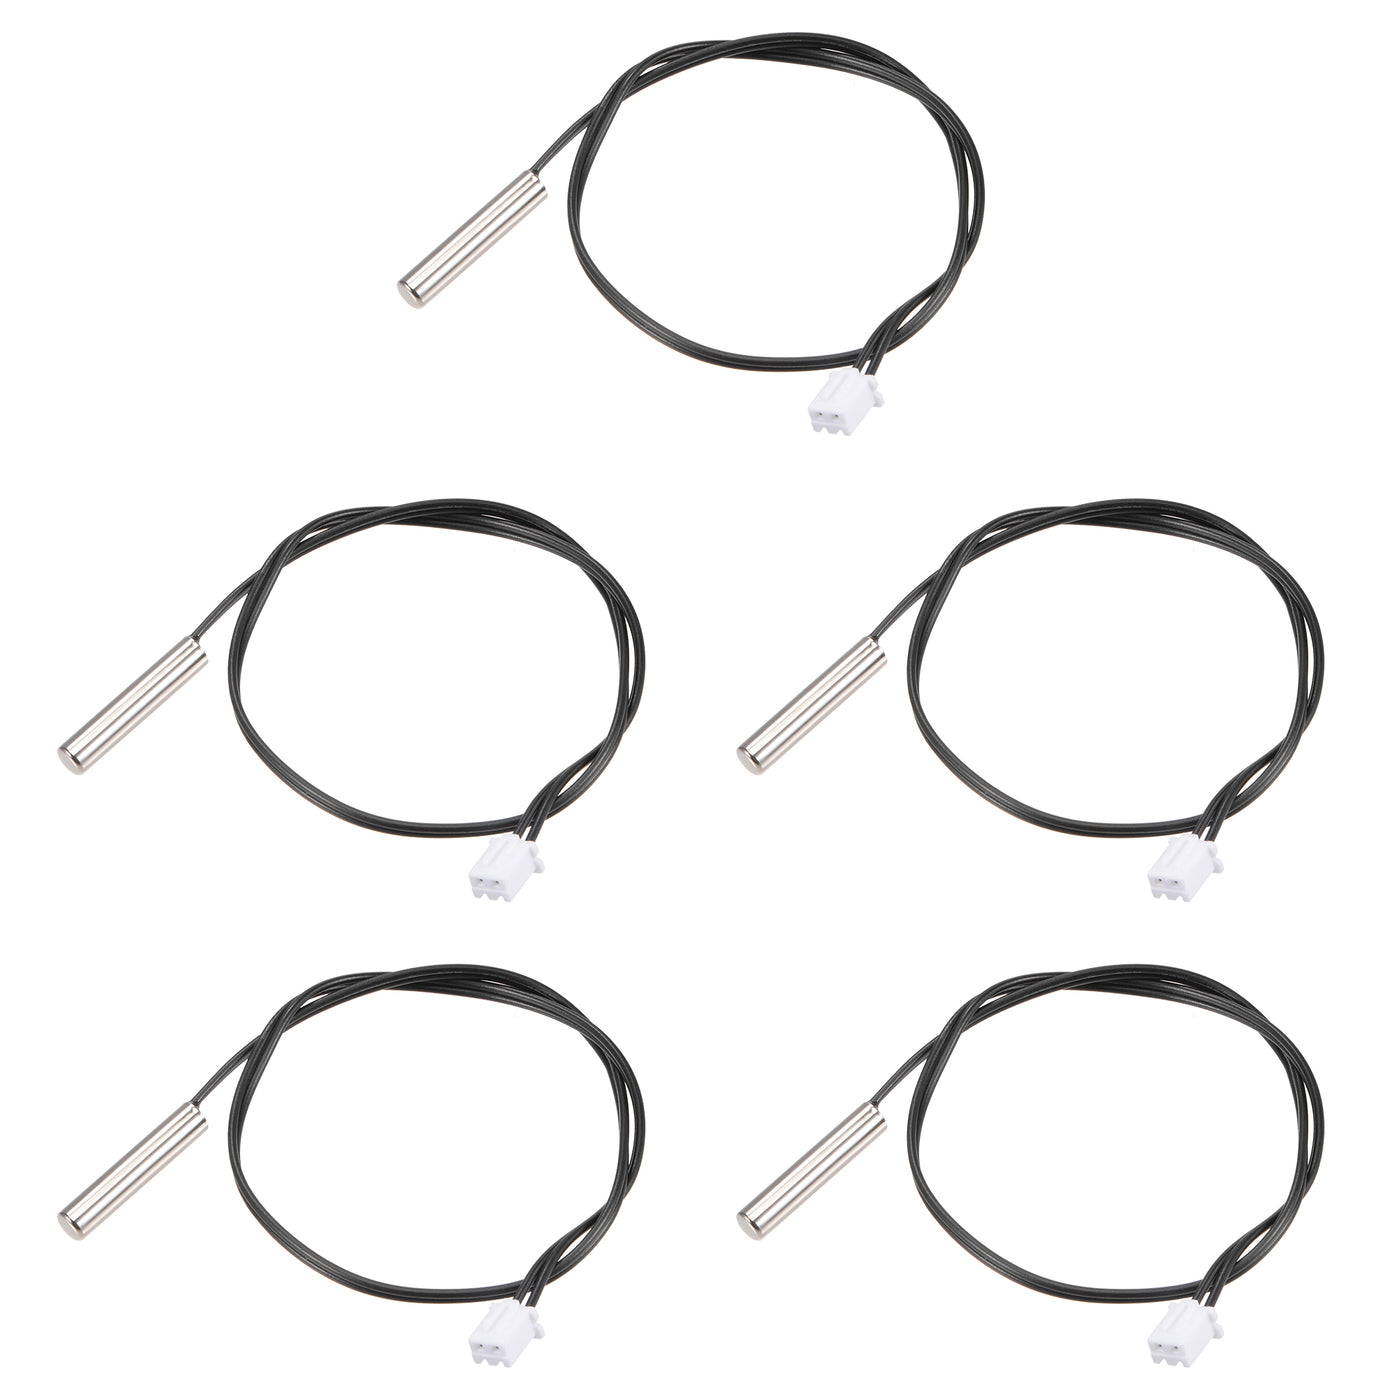 uxcell Uxcell 5pcs 5K Temperature Sensor Probe, Stainless Steel NTC Thermal Sensor Probe 30cm Digital Thermometer Extension Cable